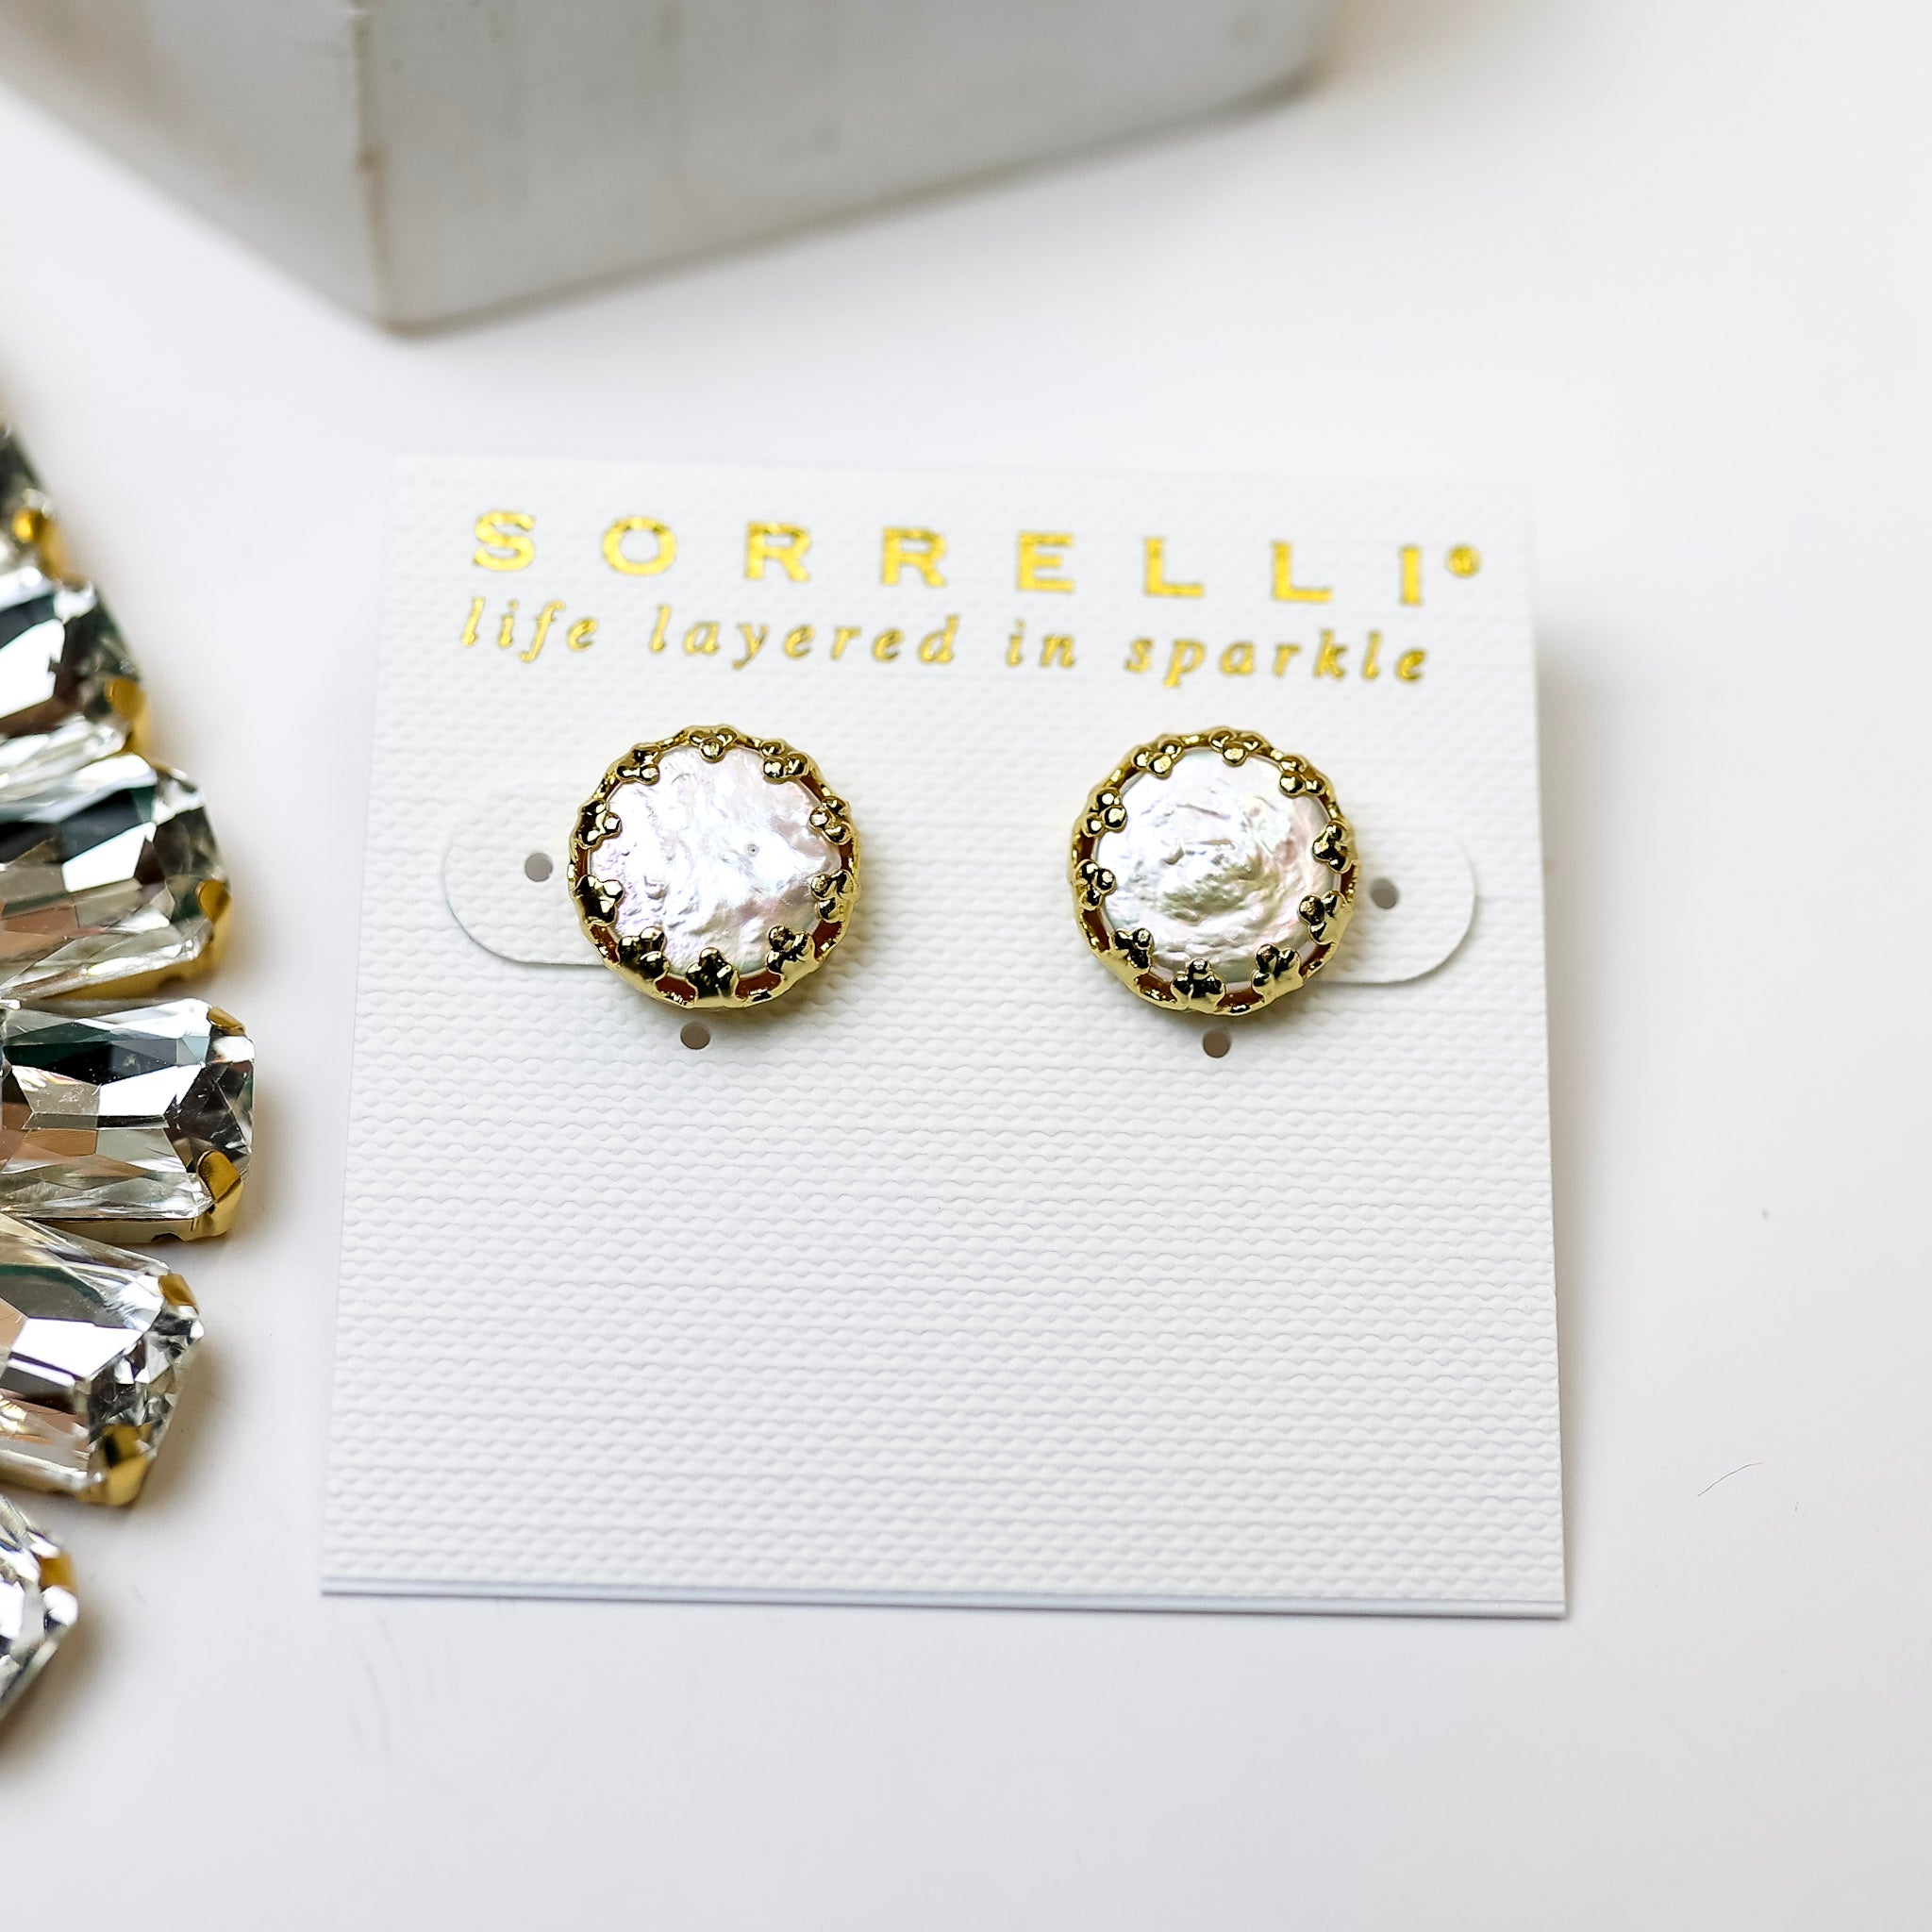 A pair of gold tone circle stud earrings with an ivory pearl center. Pictured on a white background with crystal necklaces.